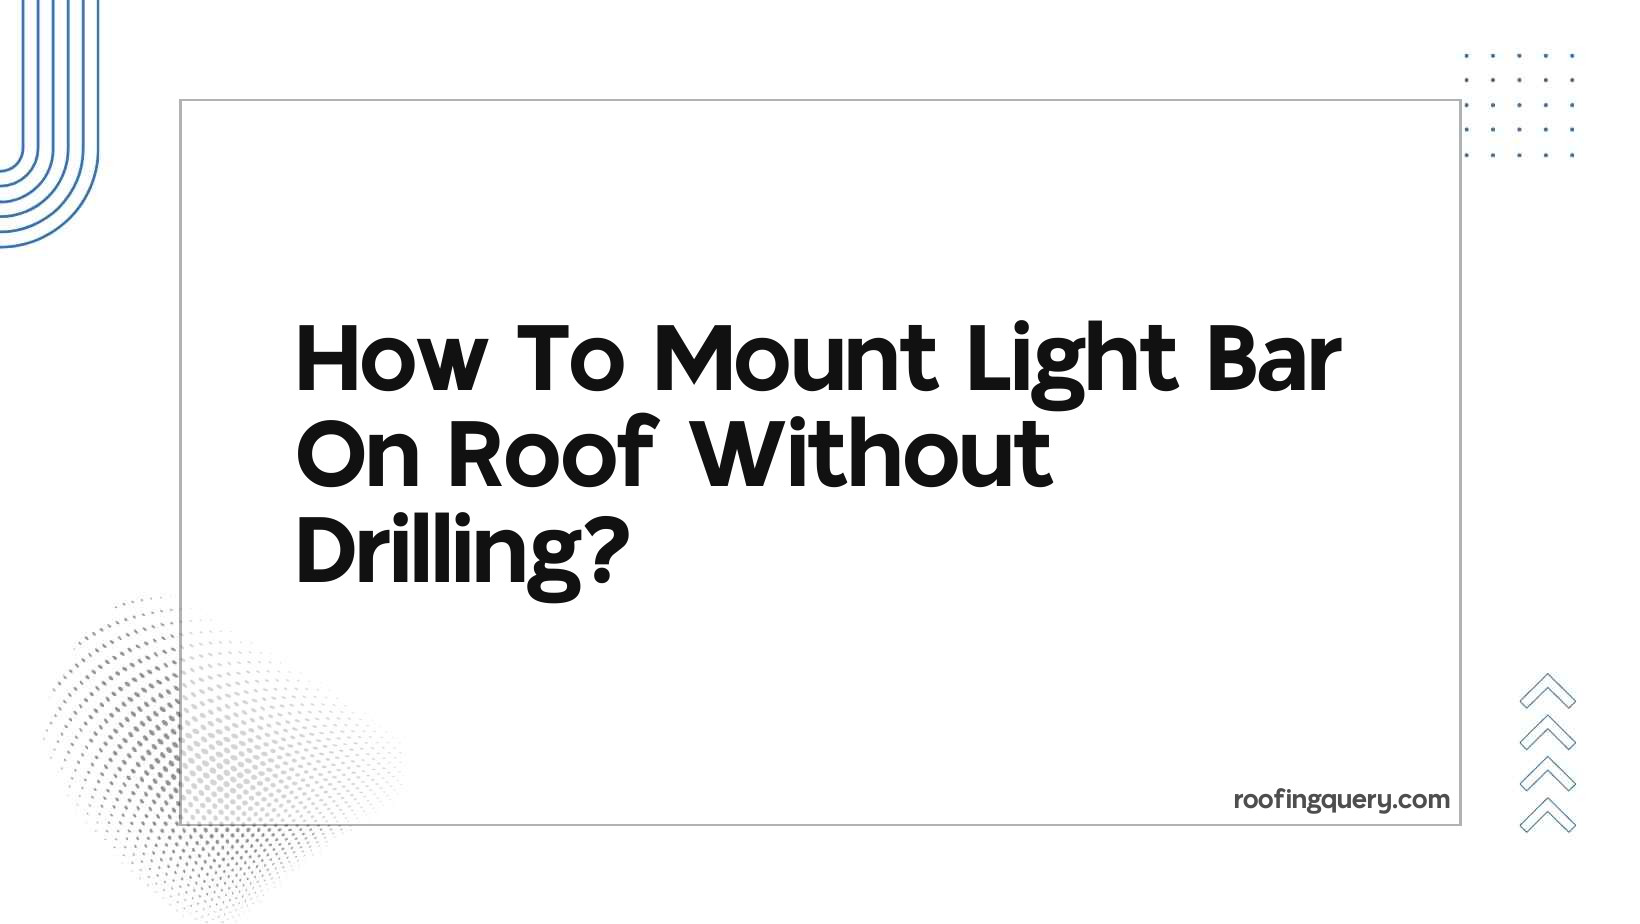 How To Mount Light Bar On Roof Without Drilling